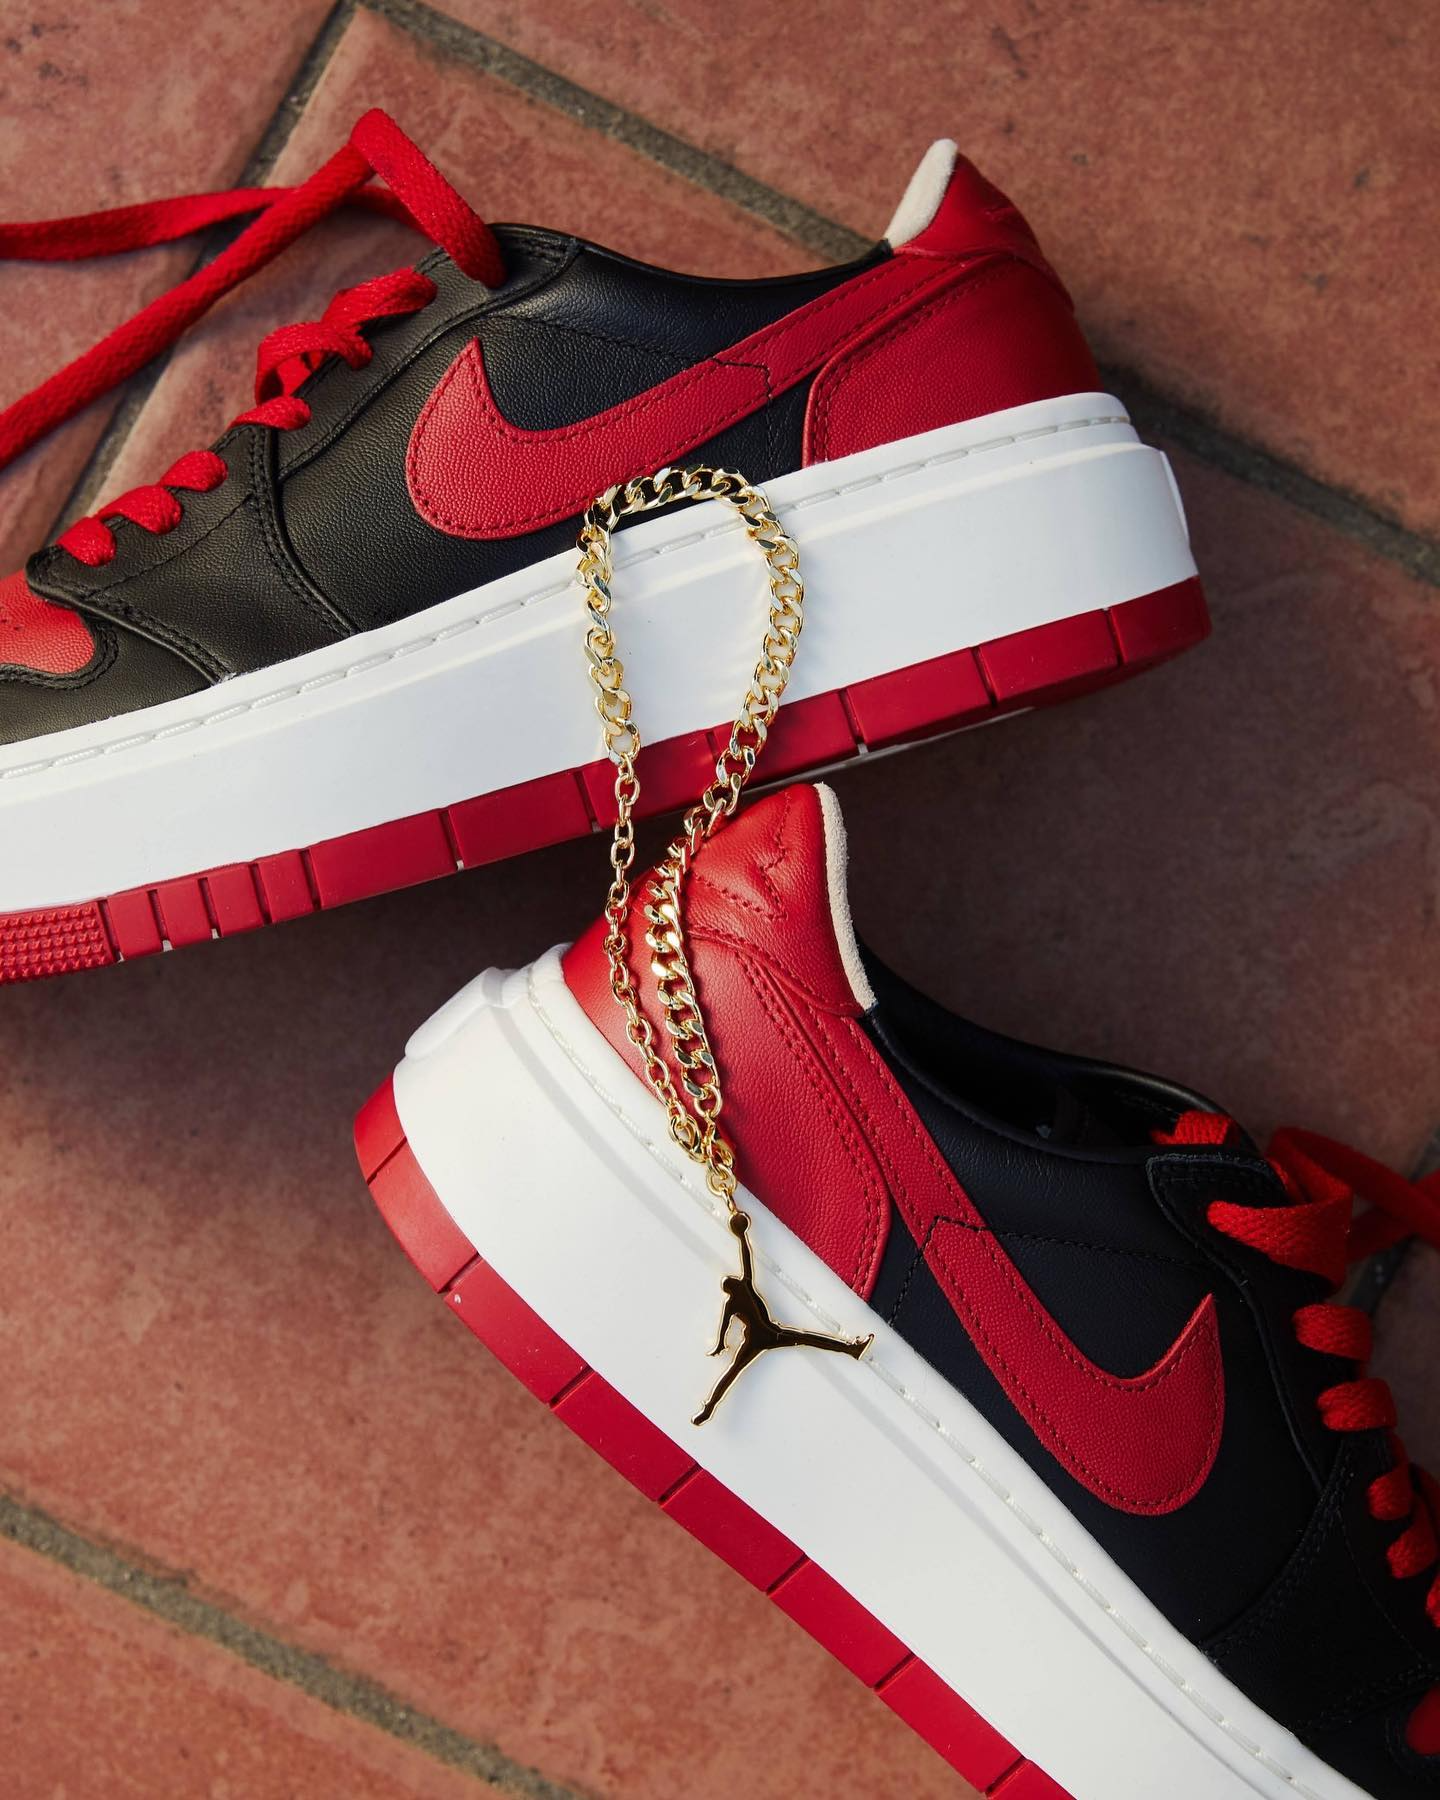 Now Available: Air Jordan 1 Low LV8D (W) Bred — Sneaker Shouts